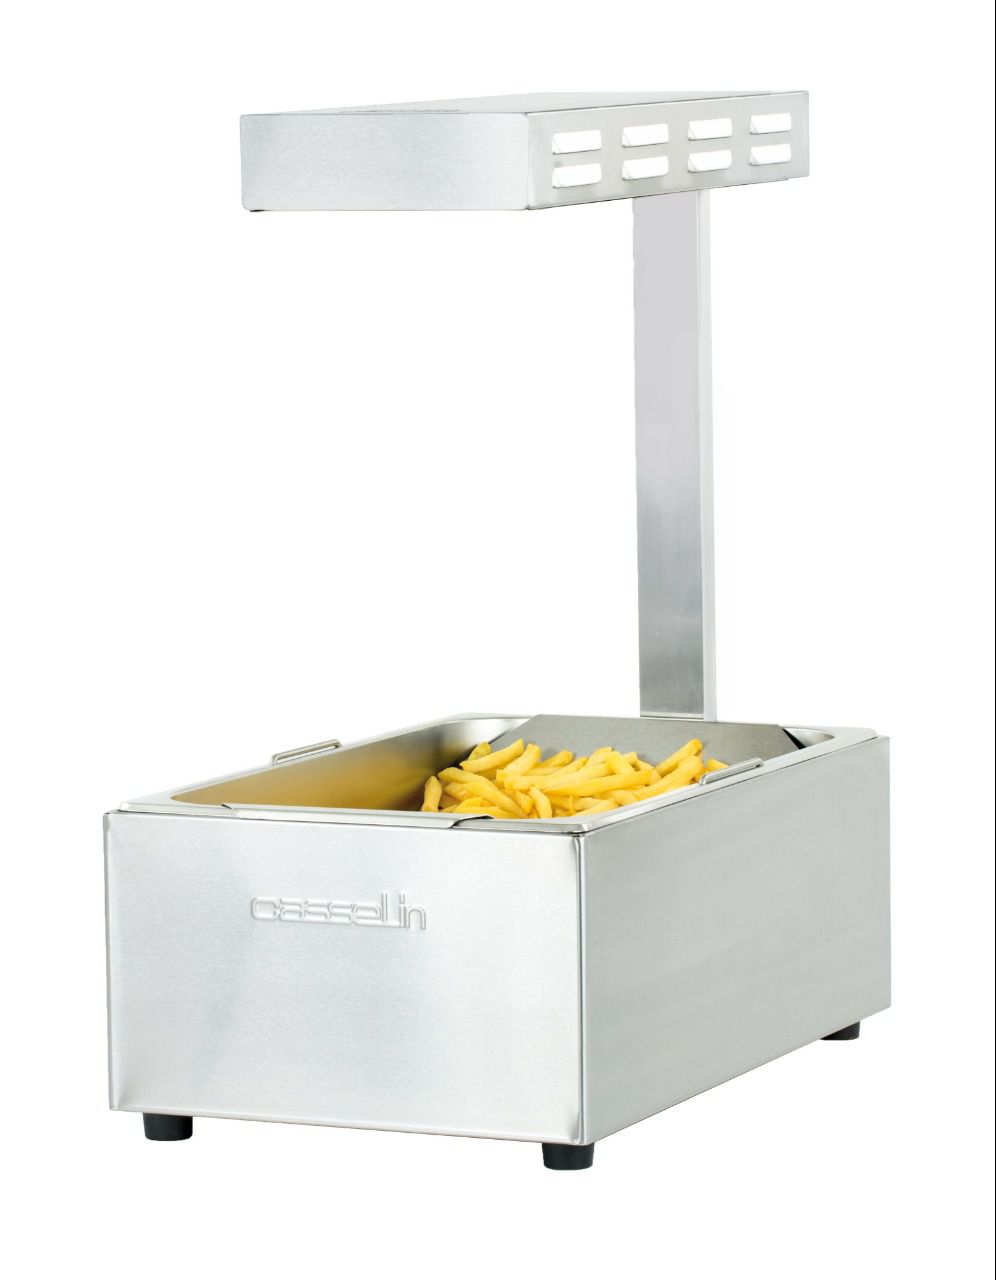 Chauffe-frites GN 1/1 Infrarouge, 230v, 1200w